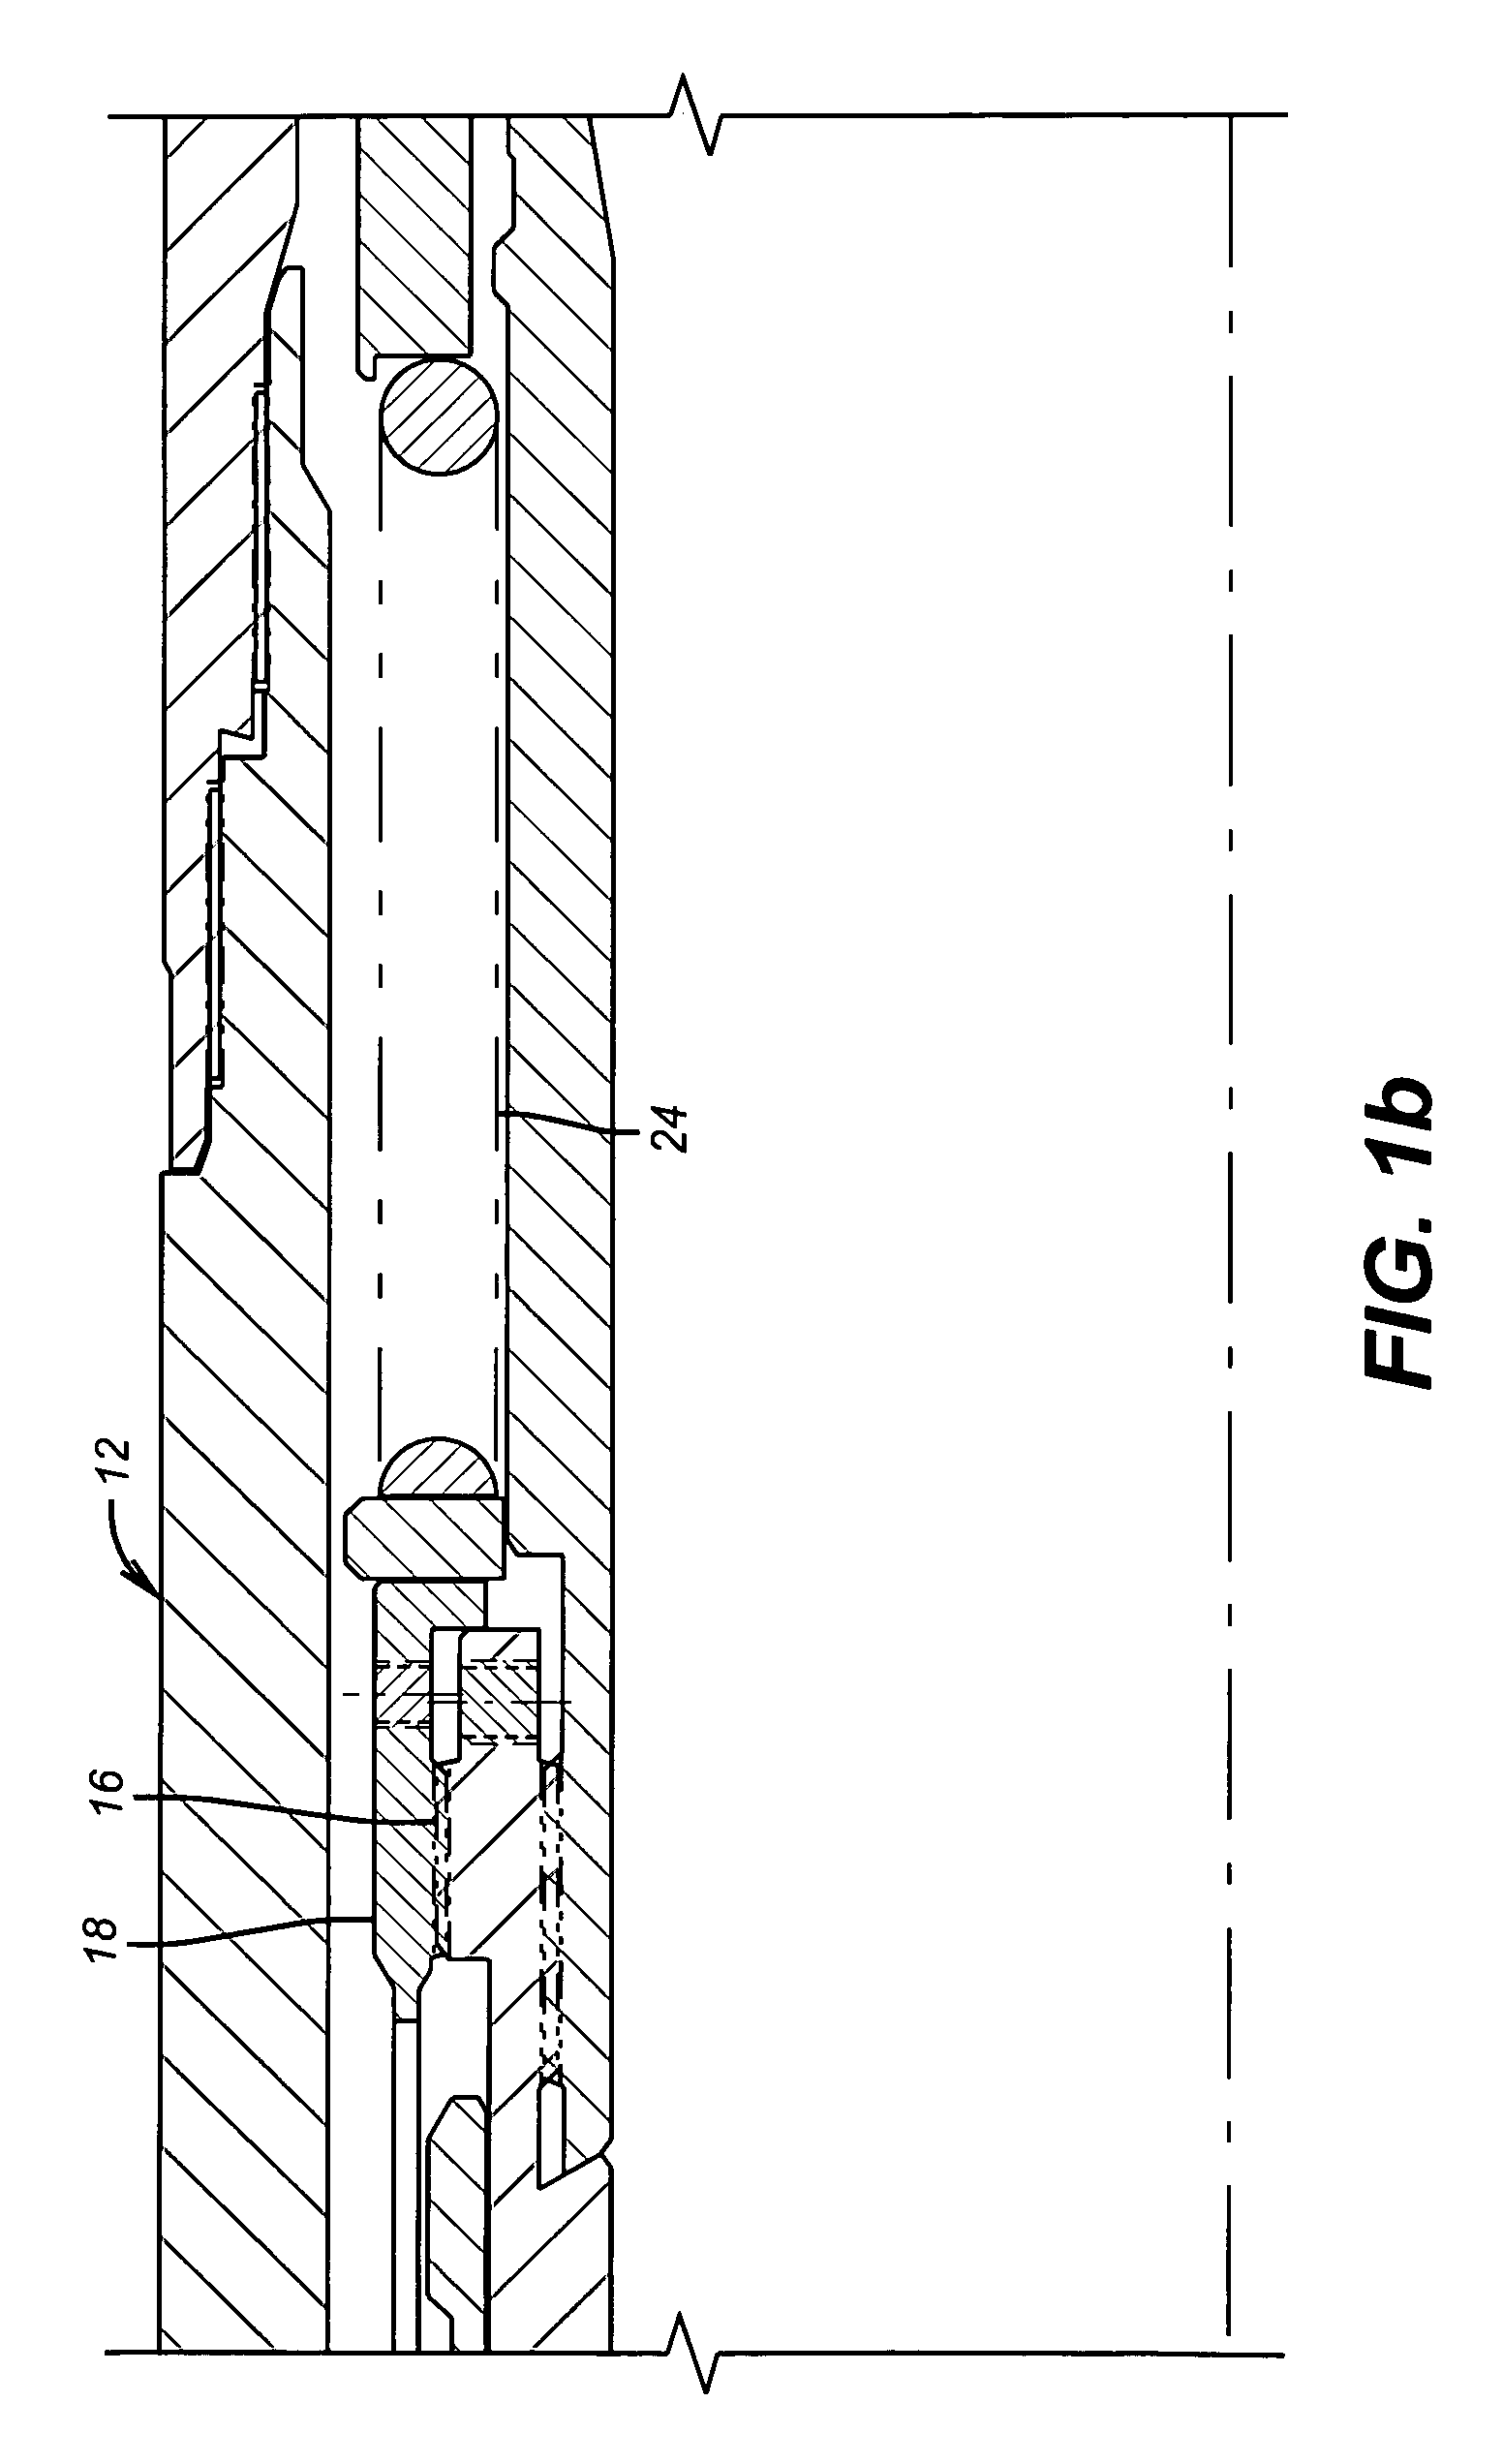 Lock for a downhole tool with a reset feature